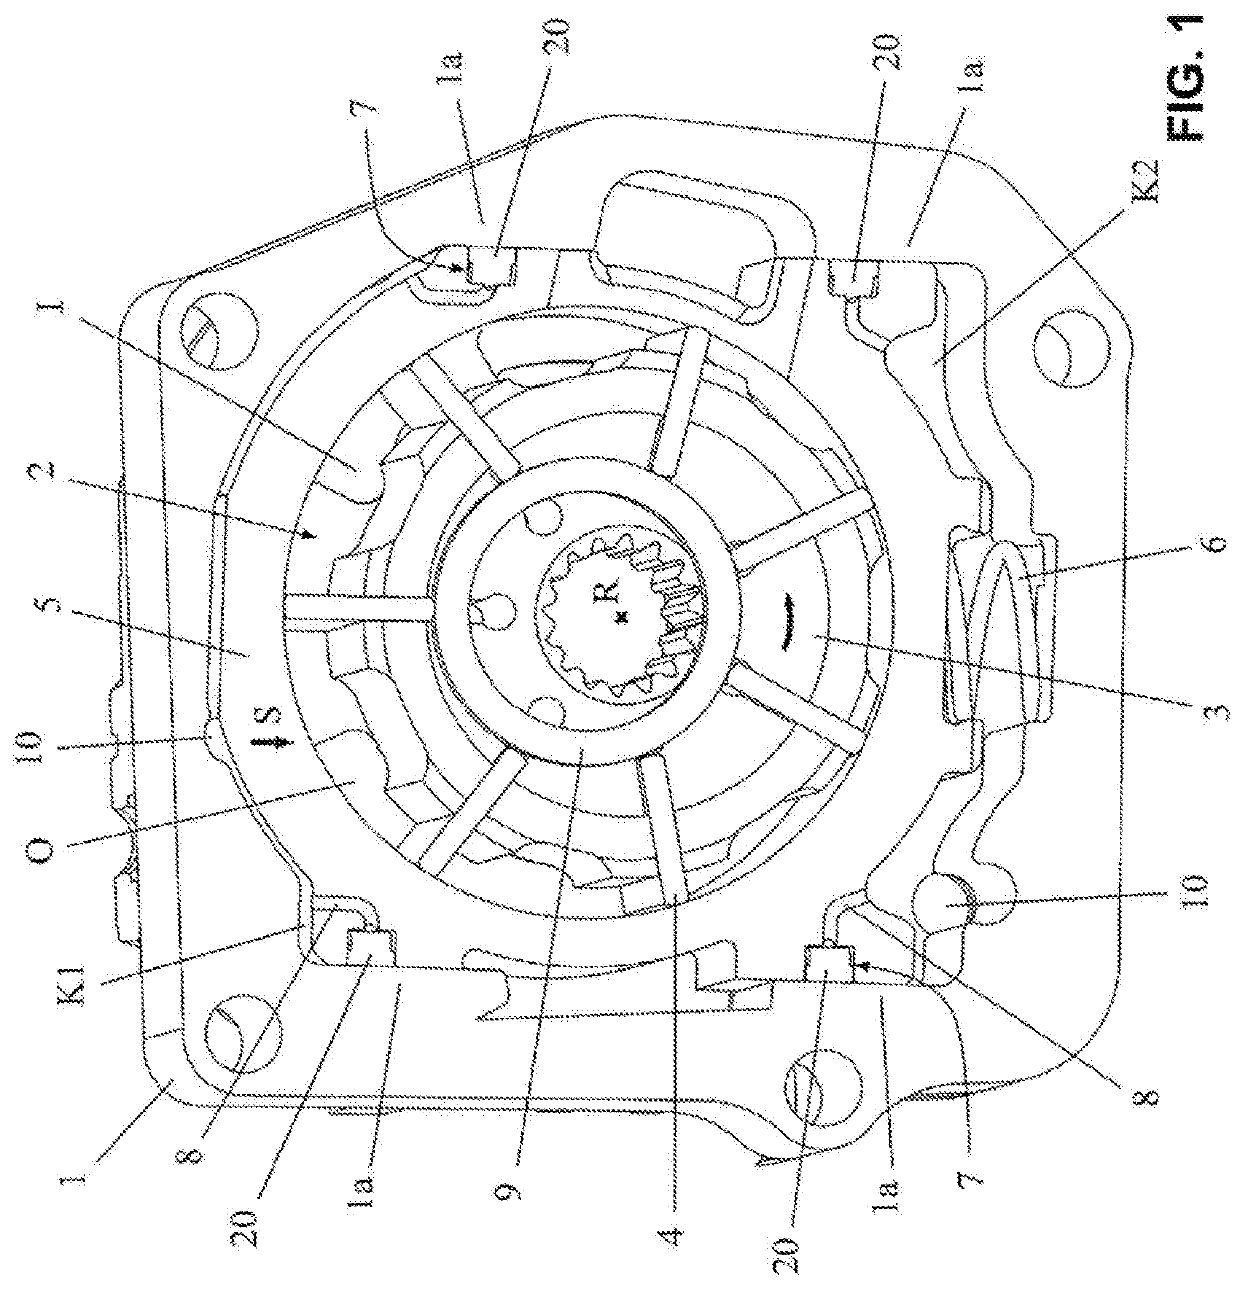 Hydraulic device comprising a sealing element